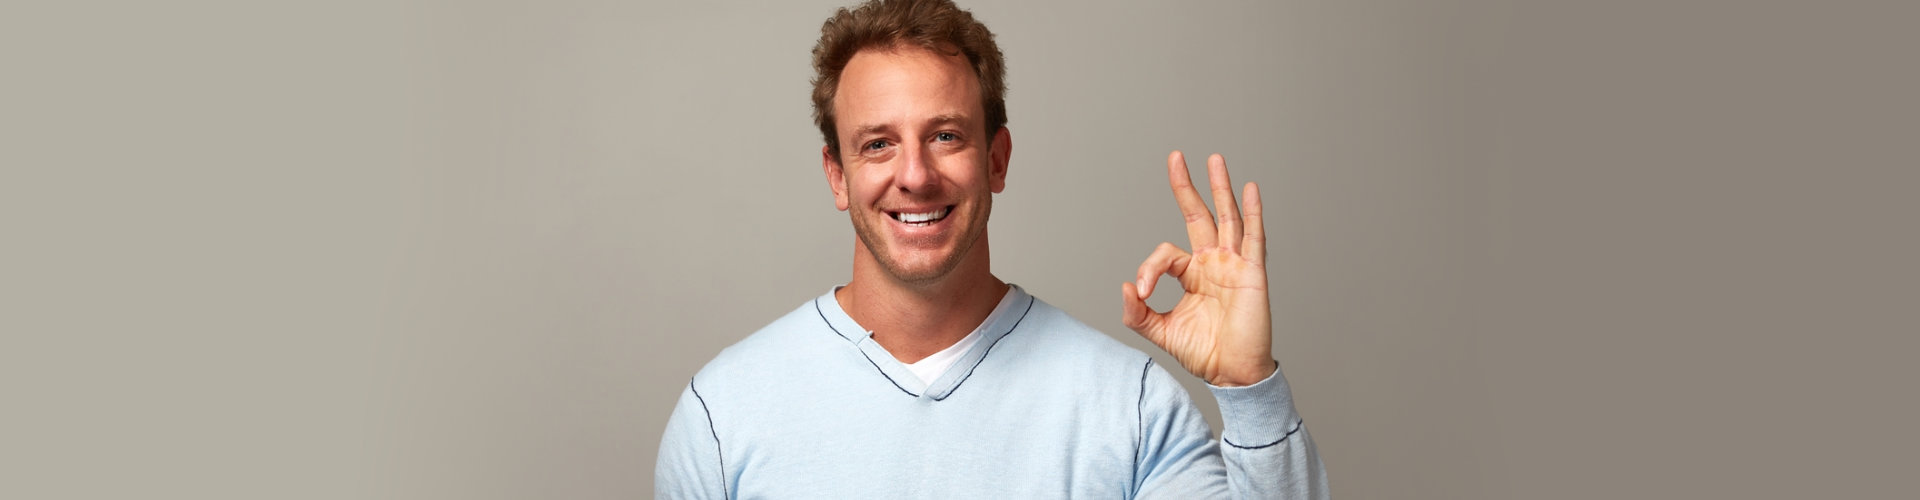 adult man smiling with okay hand sign